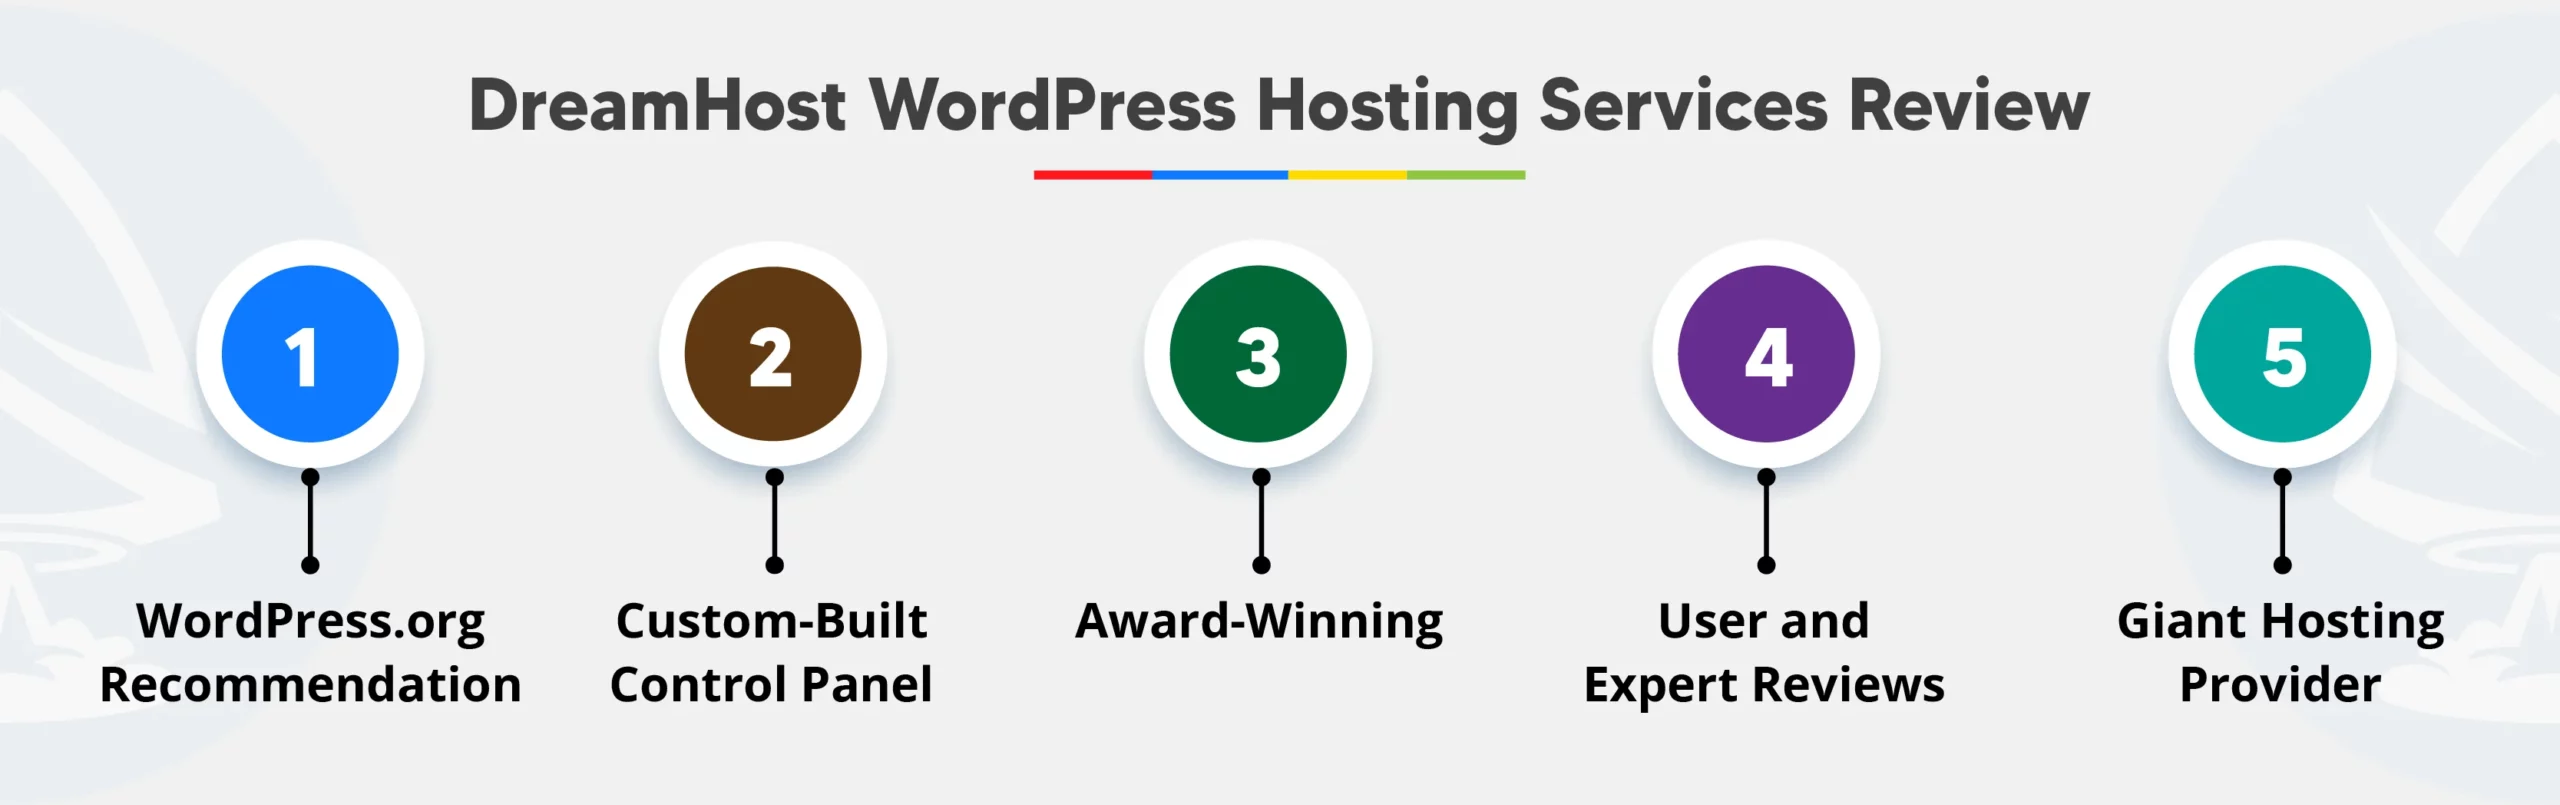 DreamHost WordPress Hosting Services Review